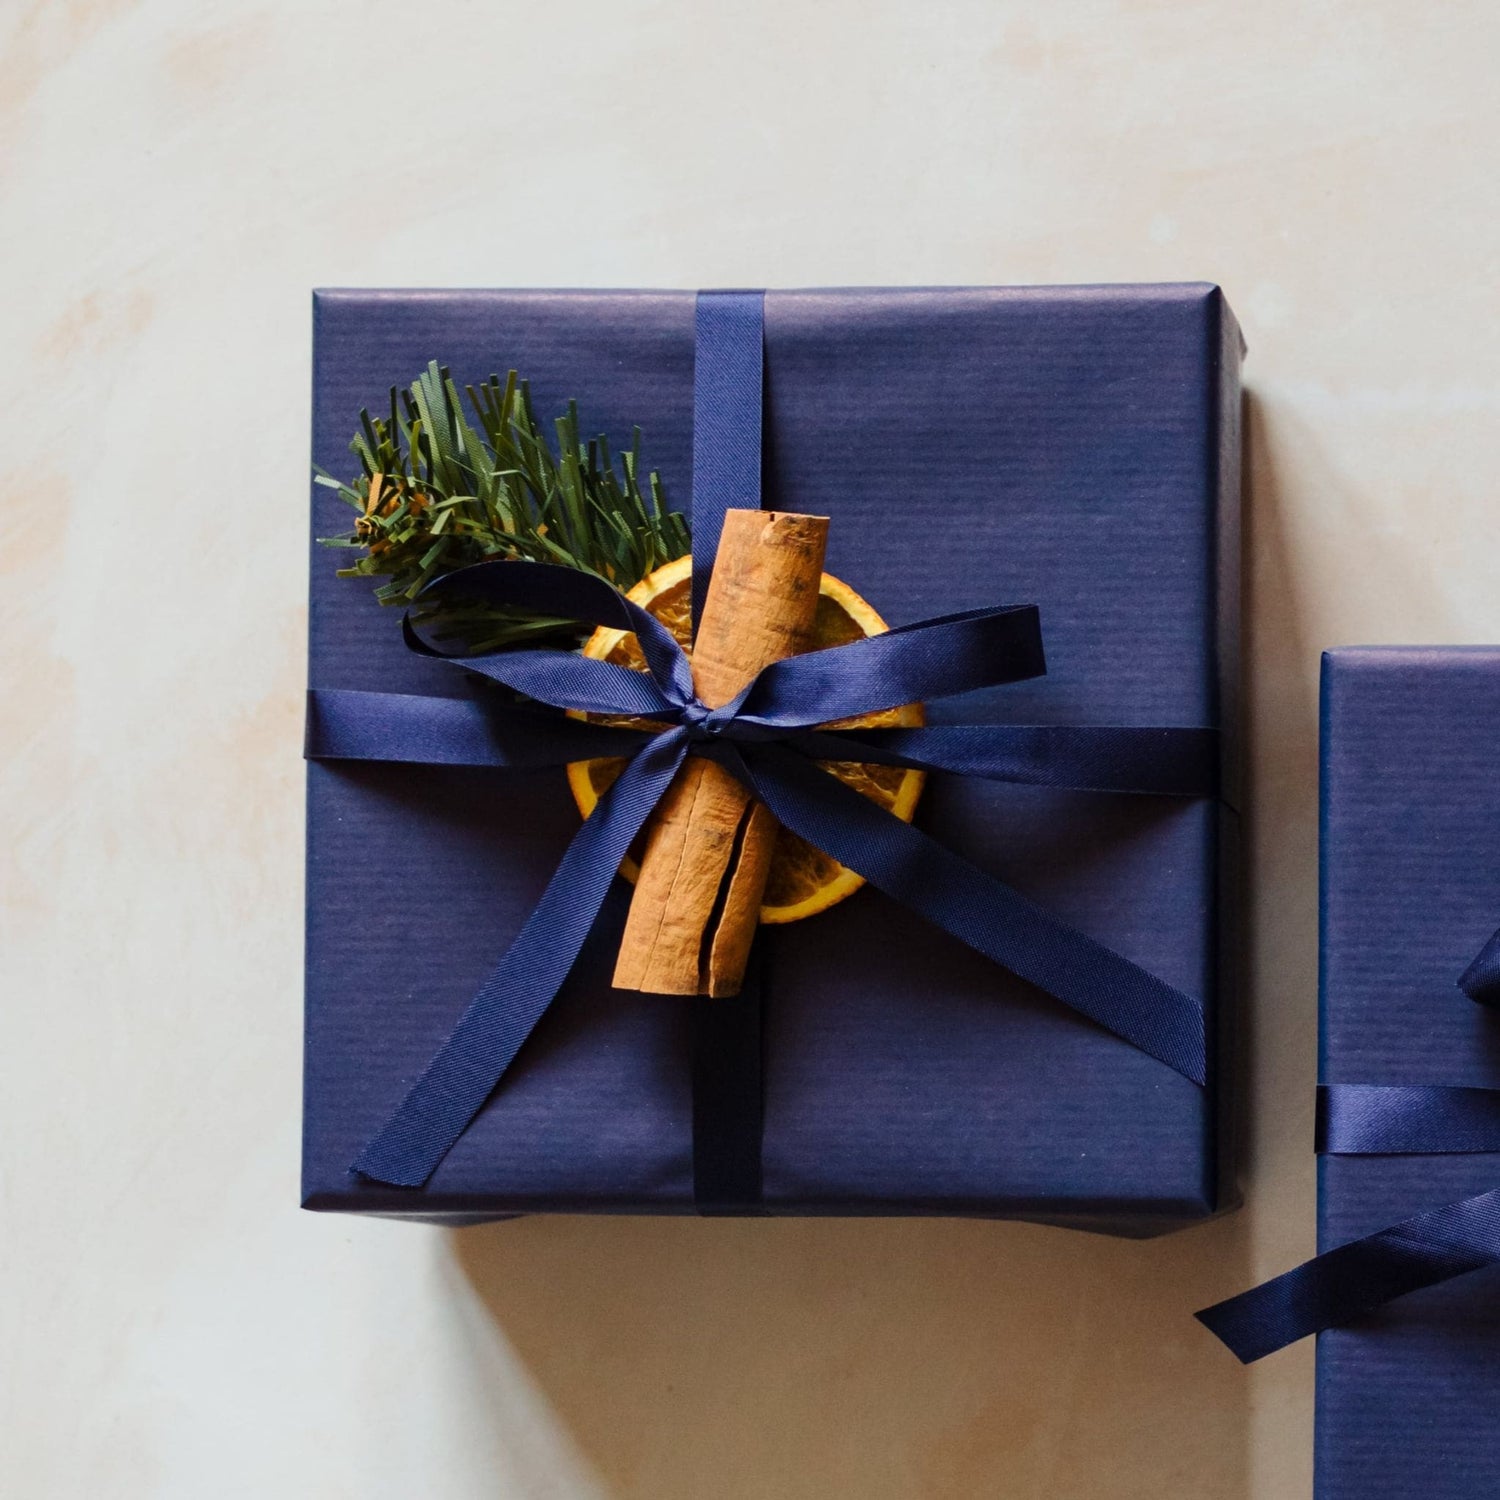 A 400g honey scented 3 wick soy candle from the Home County Co. is shown with luxury Christmas Gift Wrap. The 3 wick candle is wrapped in luxury navy wrapping paper secured with navy ribbon and Christmas embellishments.